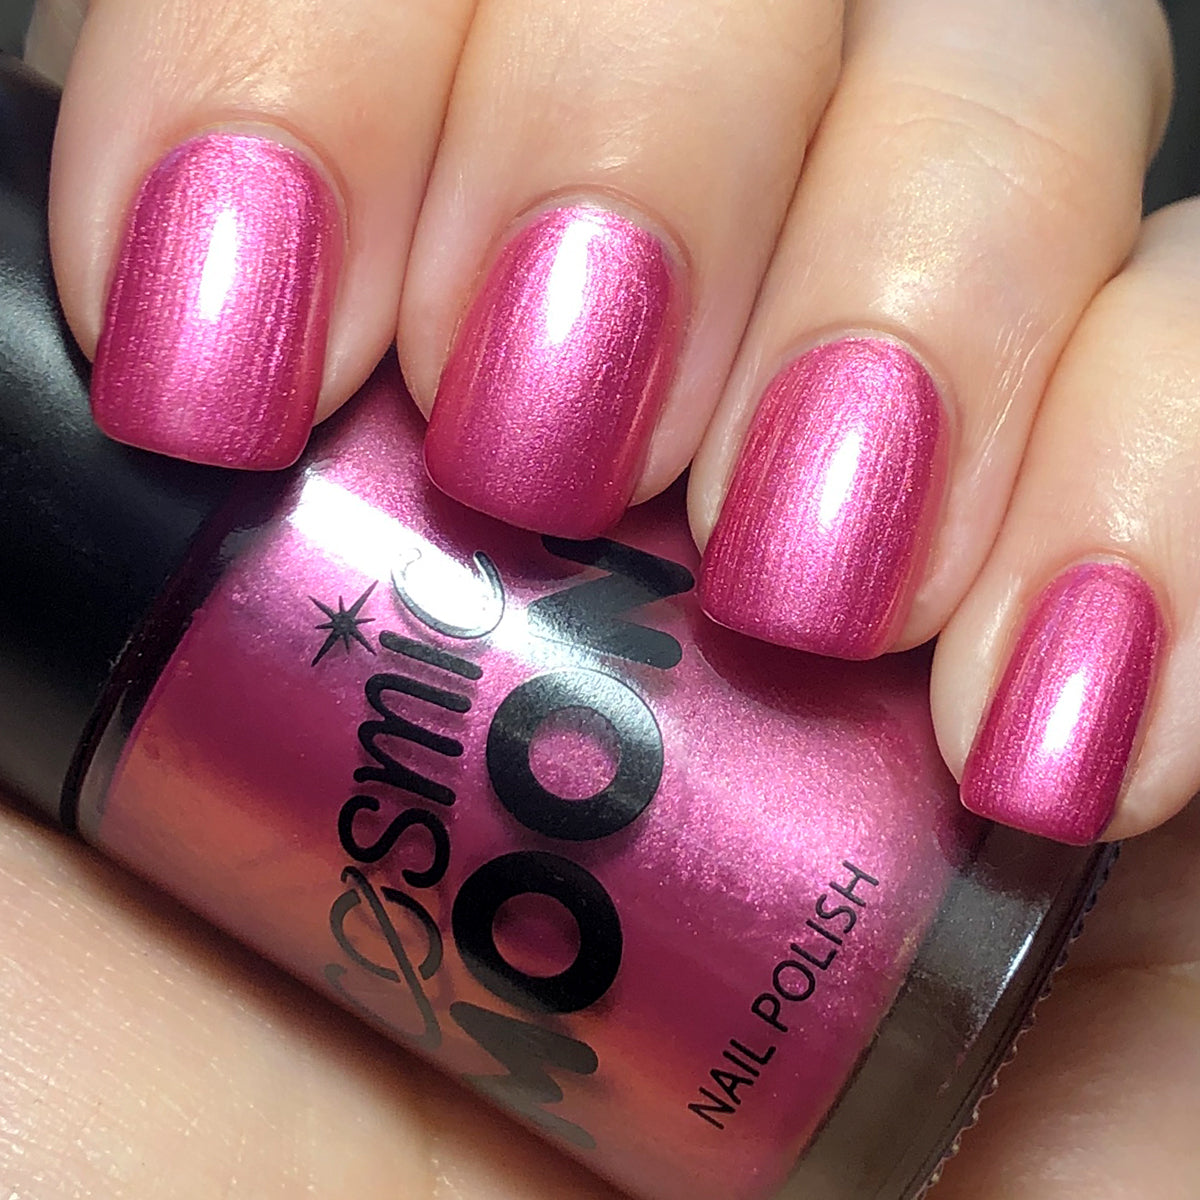 Pink - Metallic Nail Polish, 14mL. Cosmetically certified, FDA & Health Canada compliant and cruelty free.